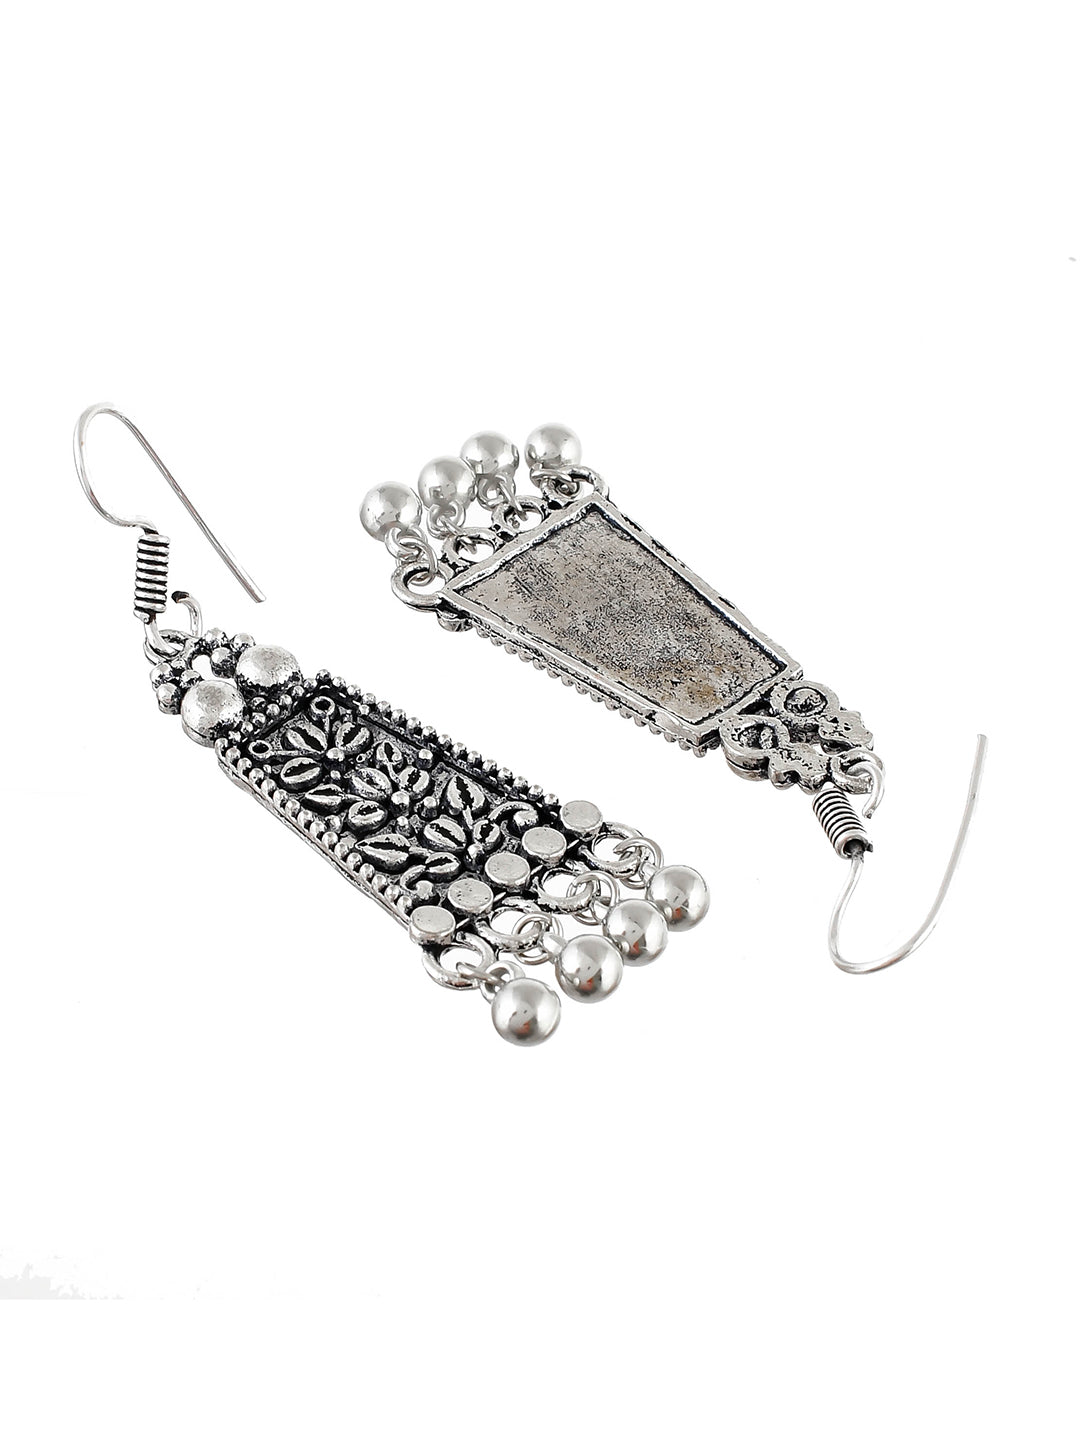 Oxidized Silver Plated Stylish Earrings For Women